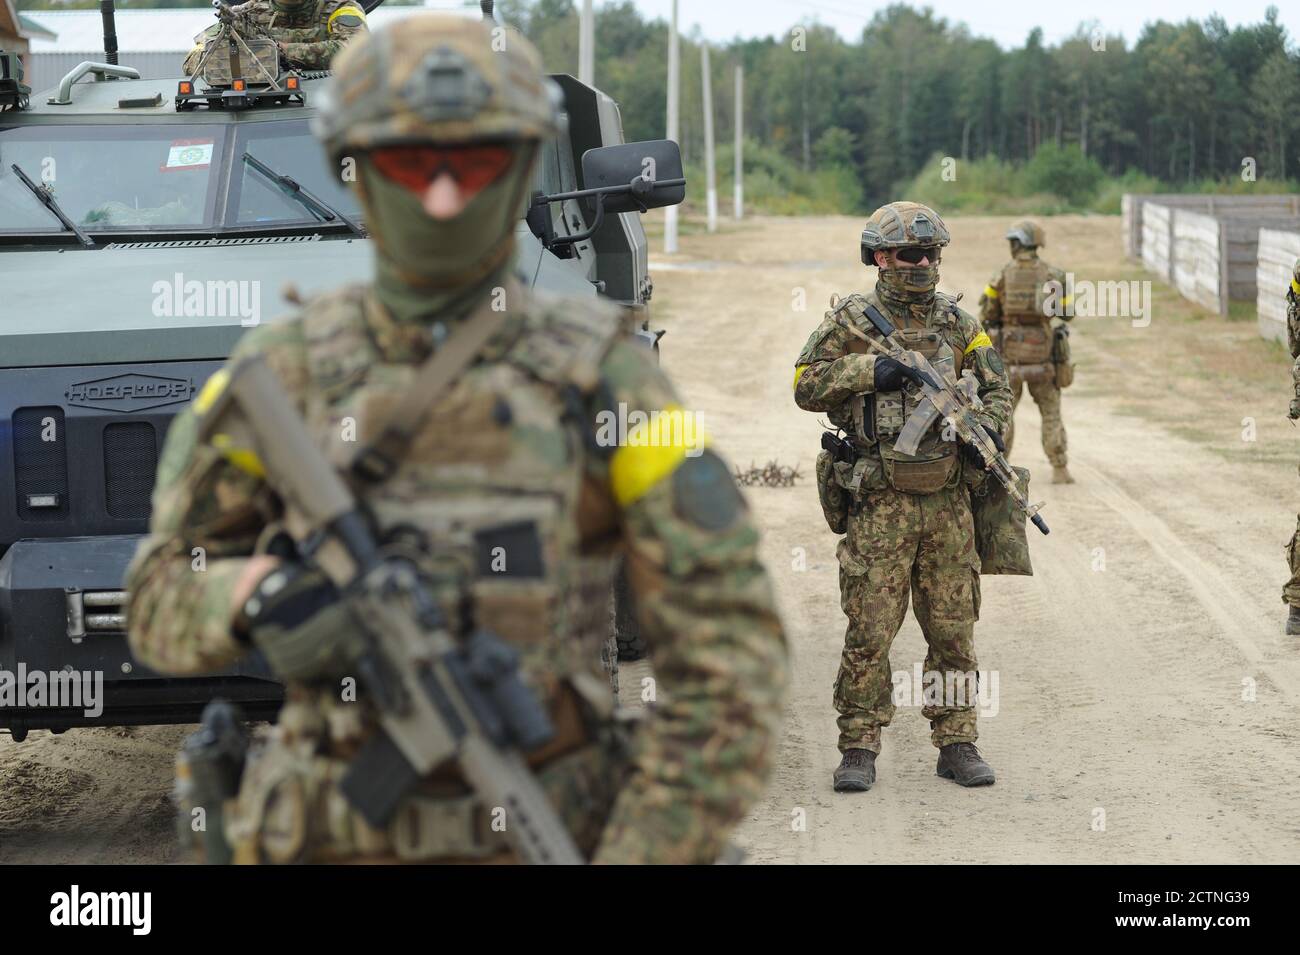 Yavoriv, Ukraine, 24.09.2020. Rapid Trident - 2020 military exercises on the Yavoriv training ground, near the western Ukrainian city of Lviv, Ukraine, 24 September 2020. Some 4,000 soldiers from nine countries including USA, Germany, Poland, United Kingdom, Romania, Canada, Denmark, Lithuania, and Ukraine take part in the joint Ukrainian-American command and staff exercise Rapid Trident - 2020 training. The training program is part of a long-term strategy improving Ukrainian defense potential and increasing the professionalism of the Ukrainian Armed Forces. Stock Photo